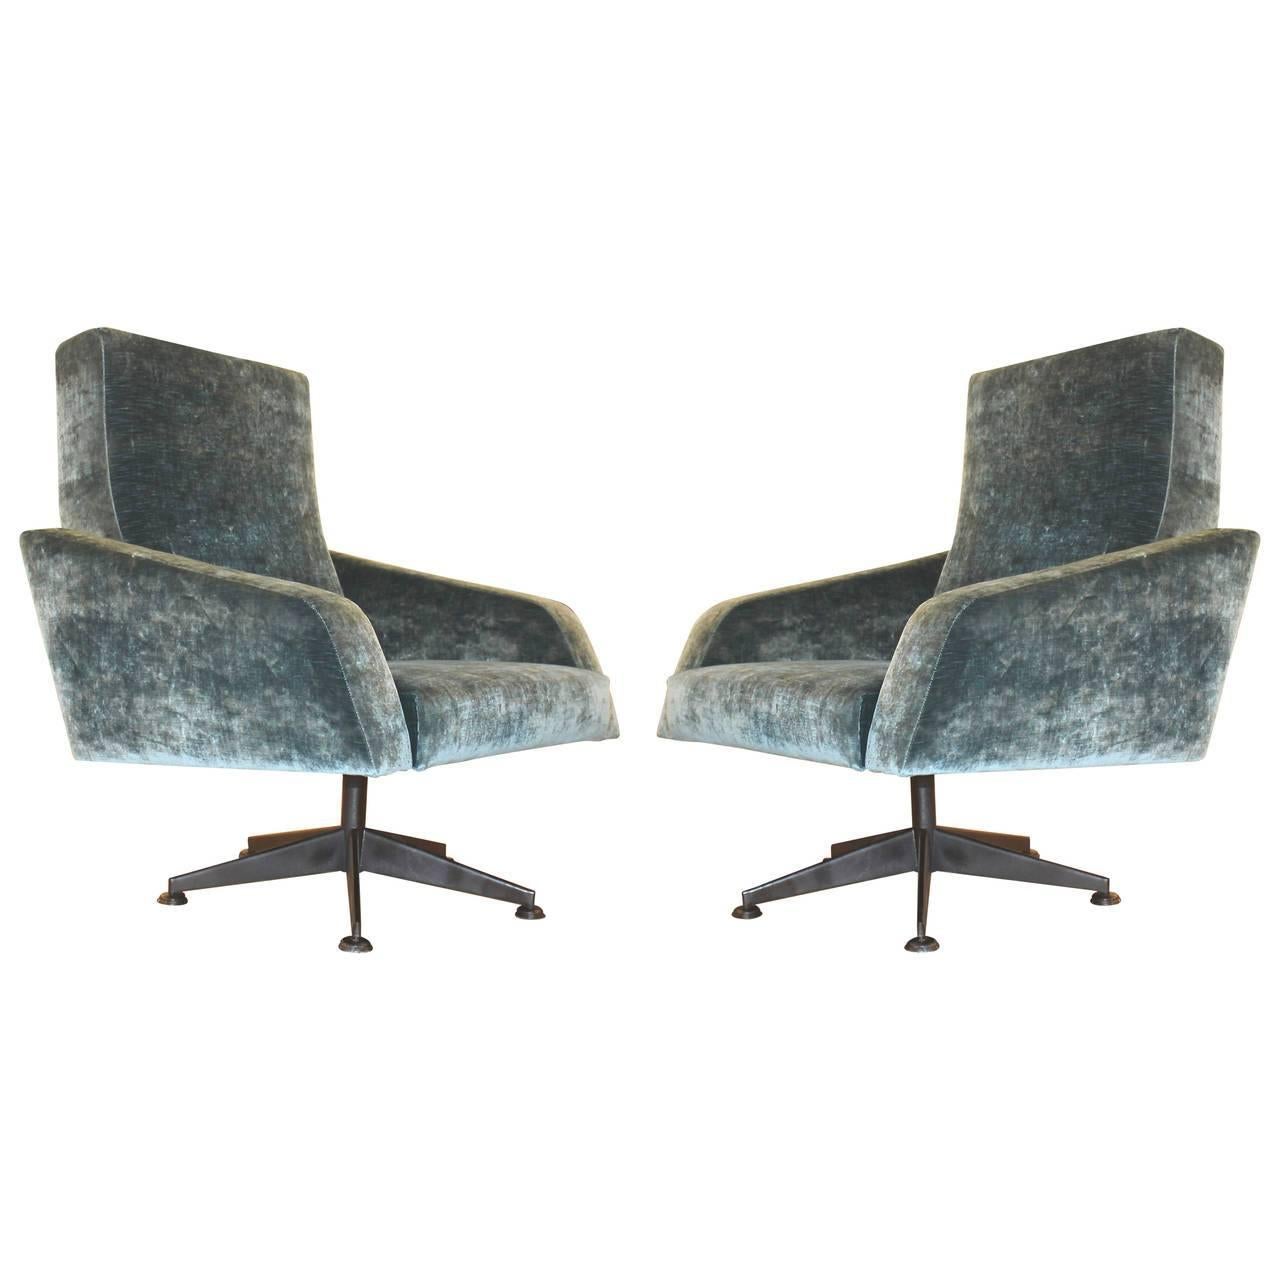 Pair of Swivel Lounge Chairs, Italy, 1960s